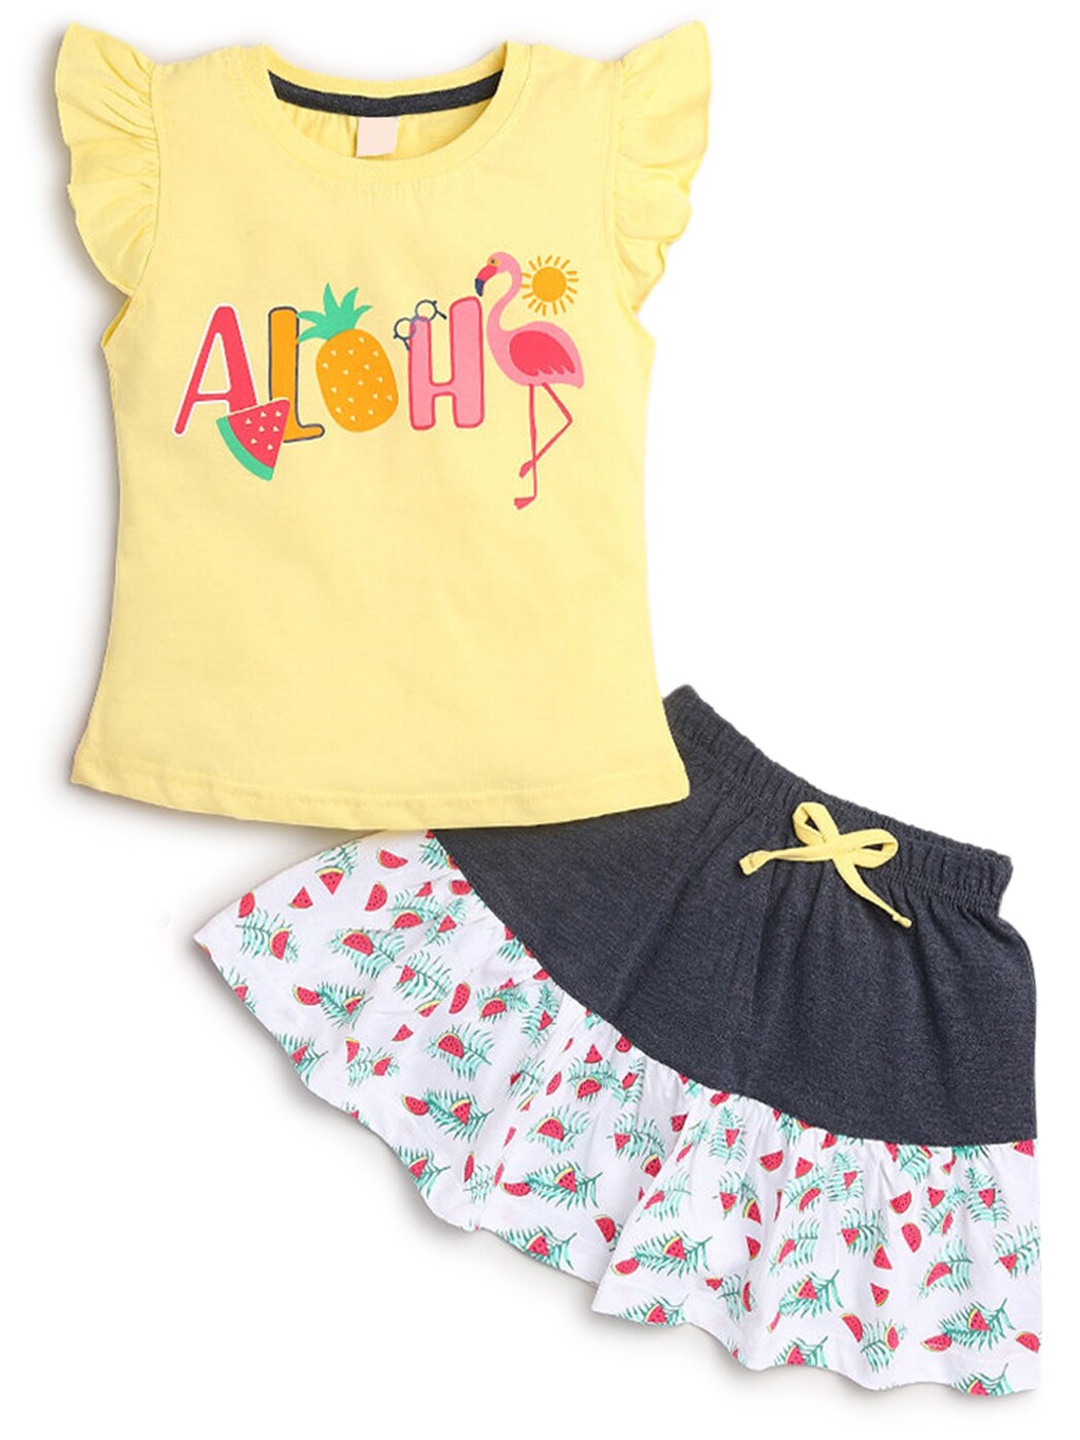 

Hopscotch Girls Yellow & Blue Printed Cotton T-shirt with Skirt